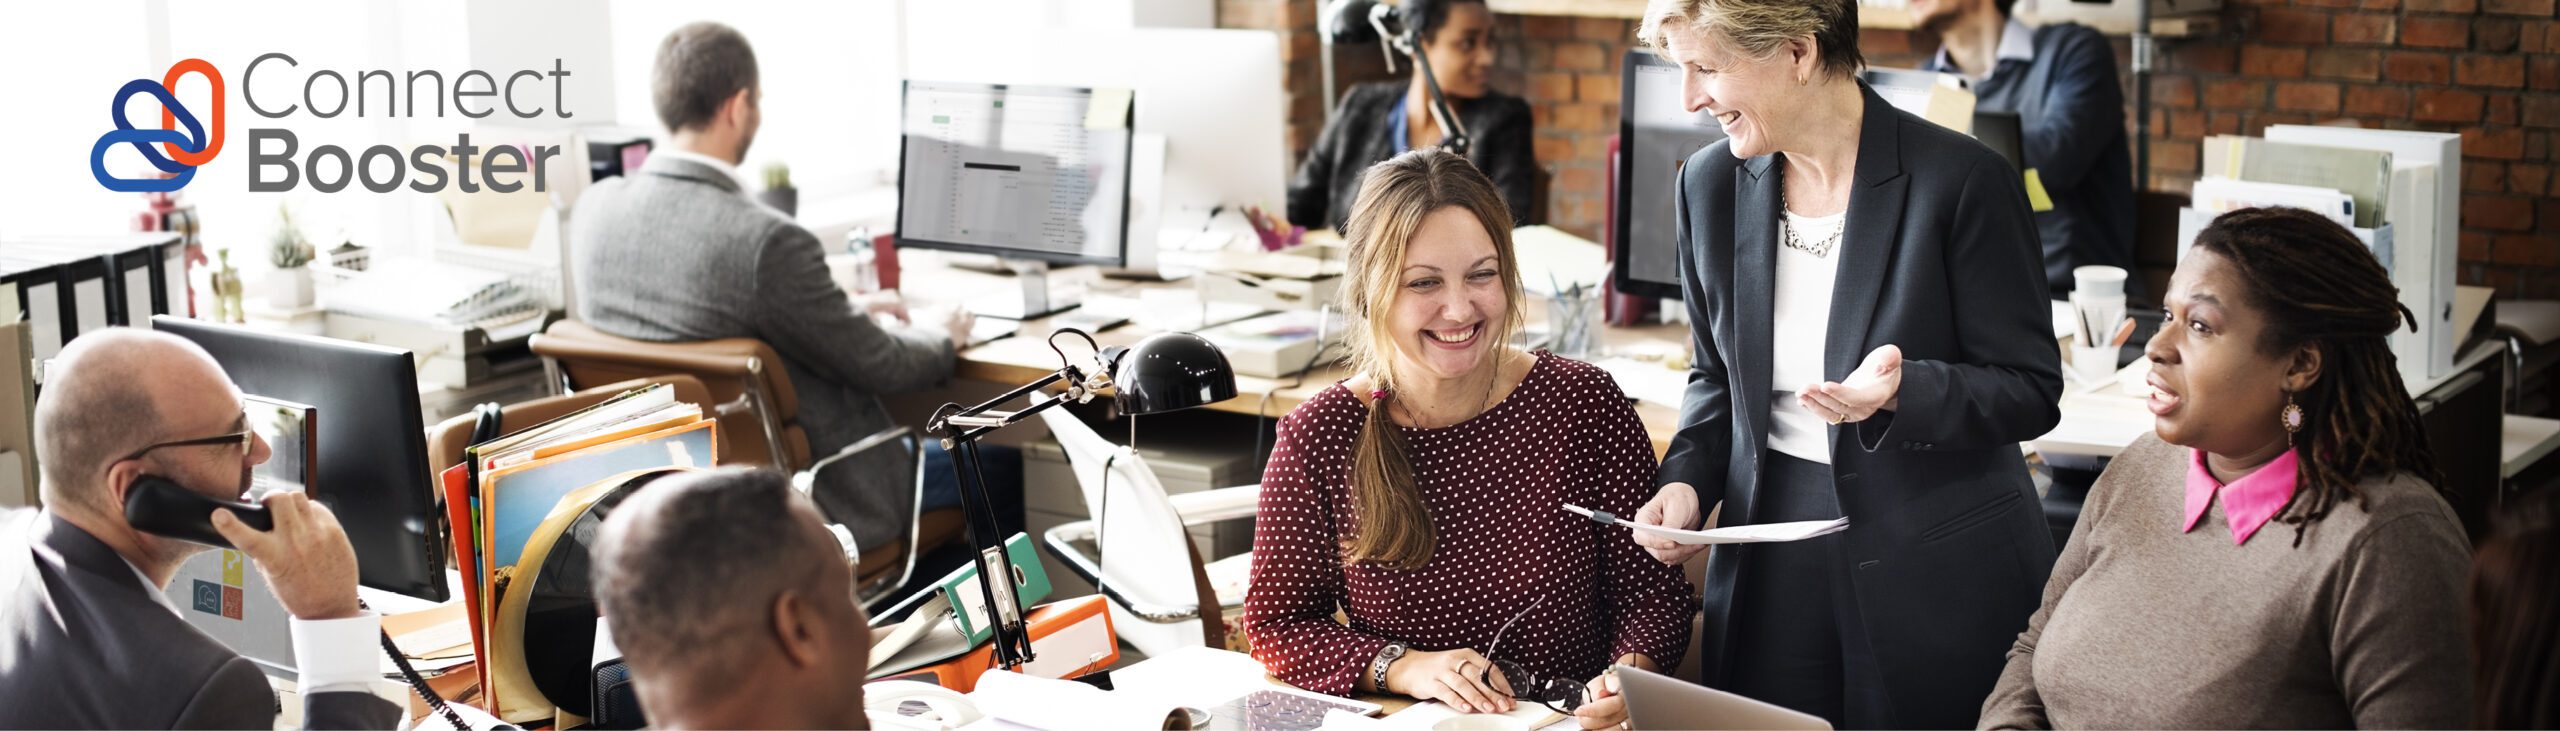 smiling people working at a messy desk